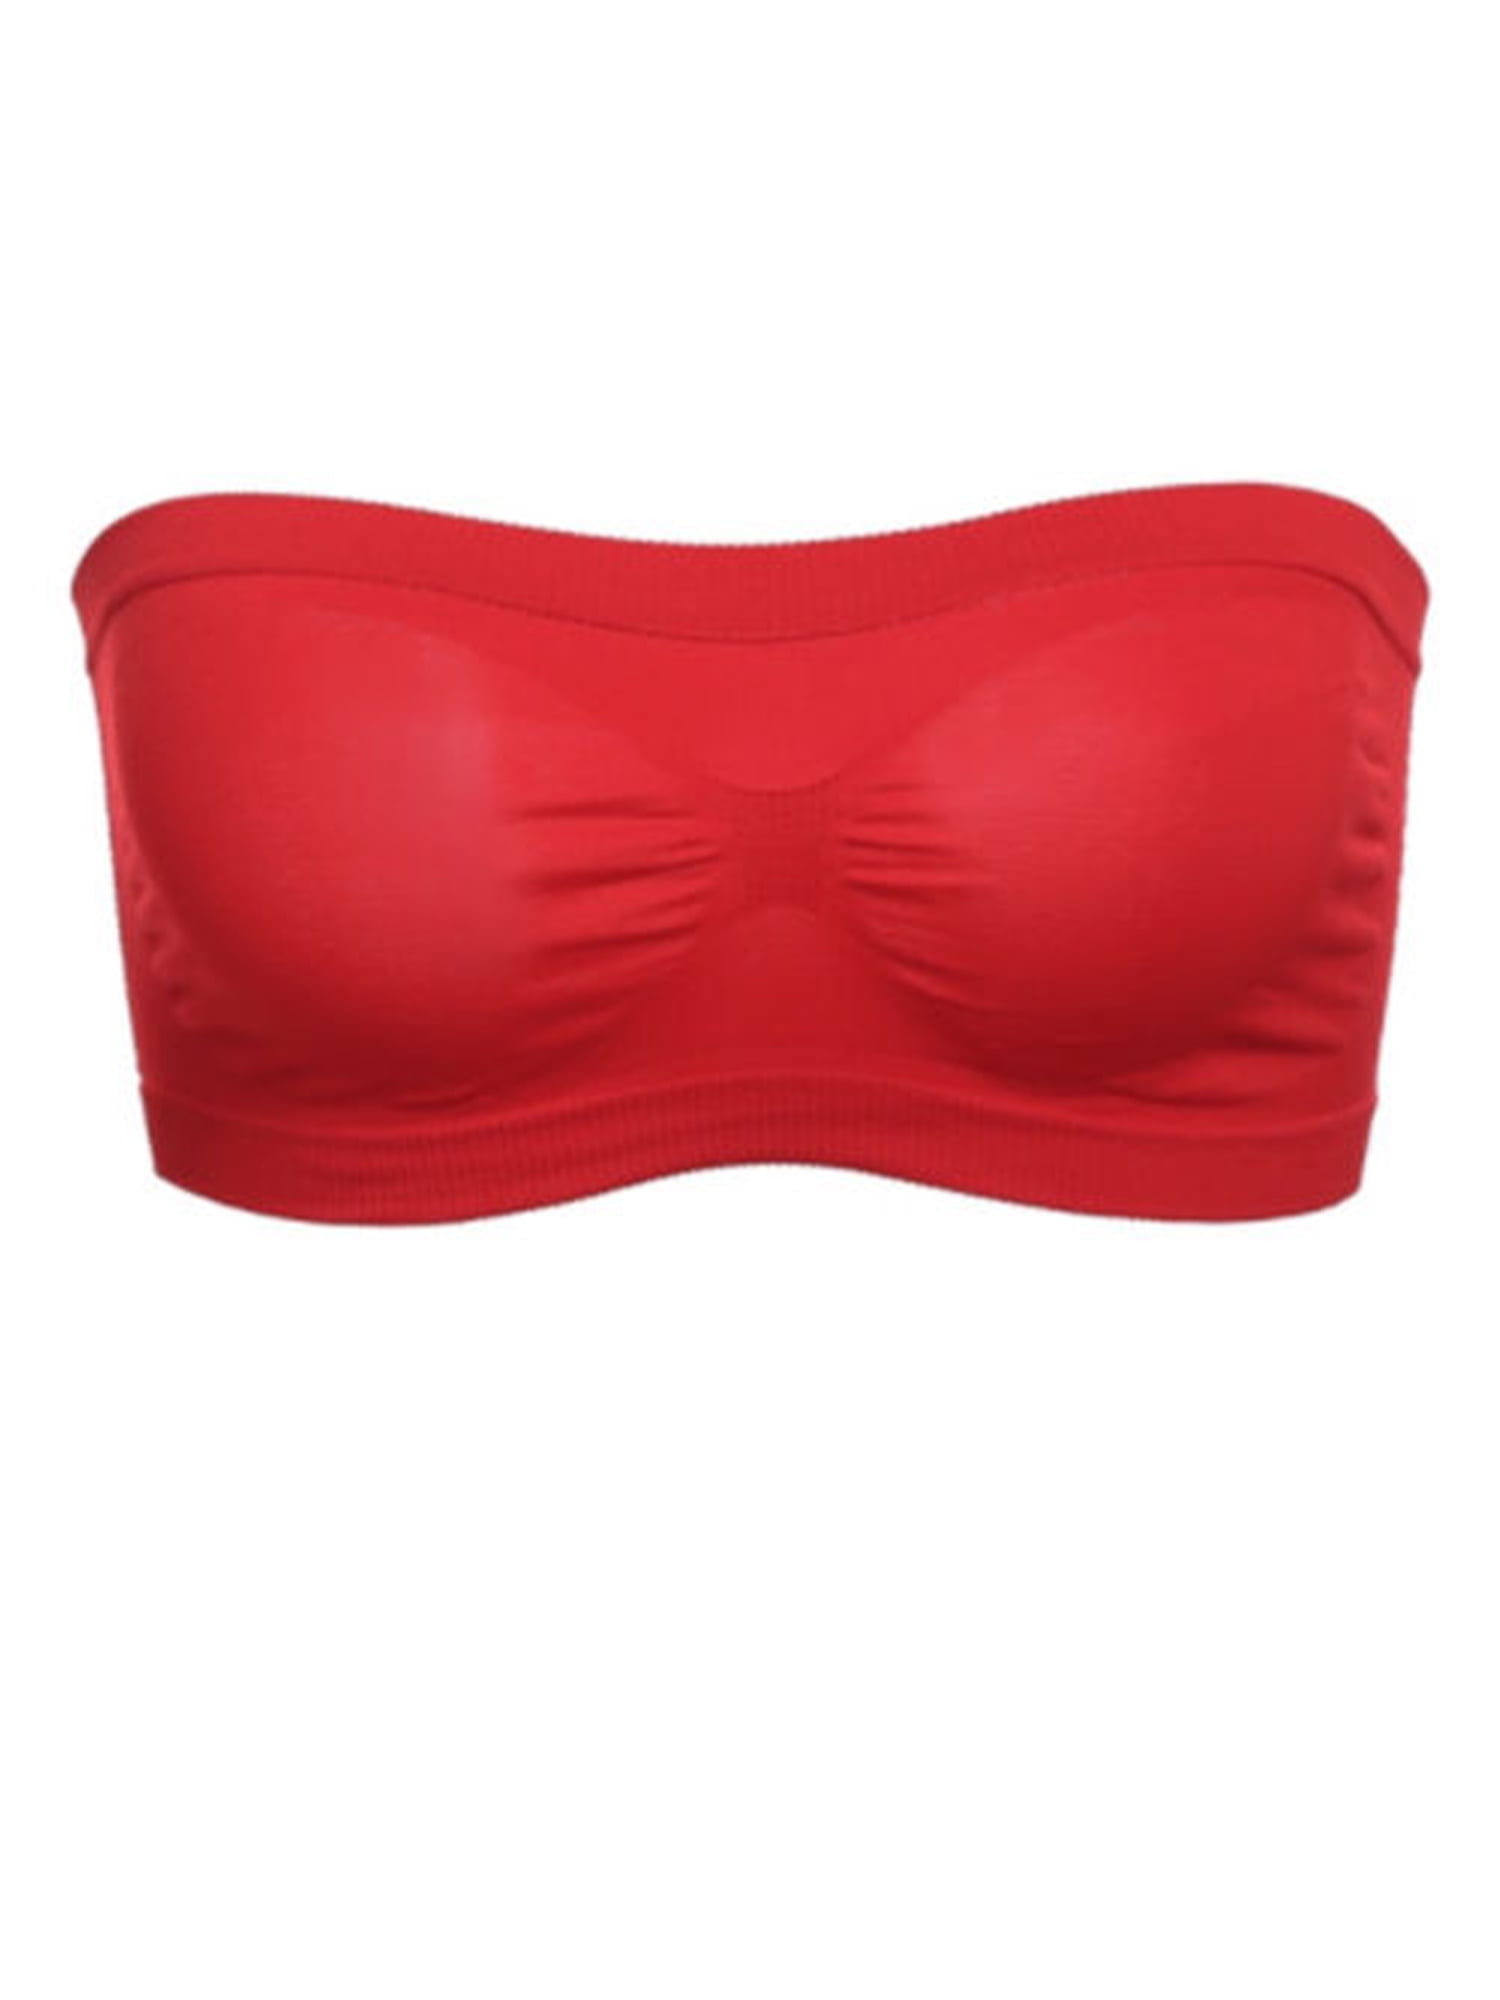 CenturyX Women Seamless Strapless Bra Bandeau Breathable Padded Boob Fits  Fashion Tube Top Solid color ports Bra Red ONE SIZE 